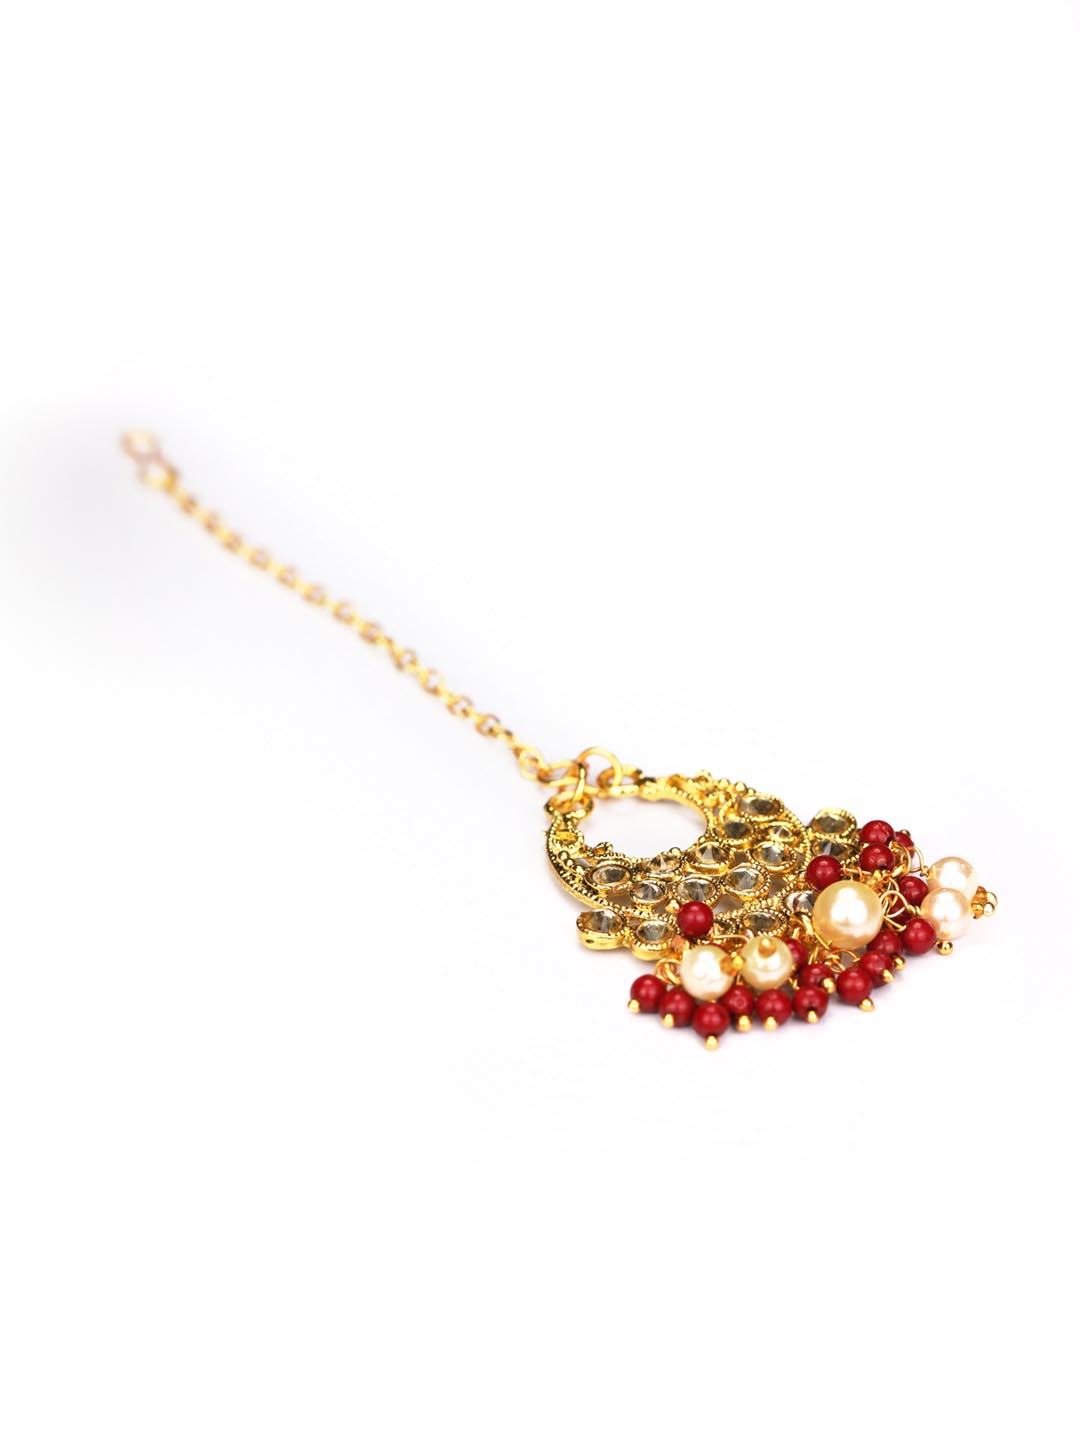 Stones Pearls Gold Plated Floral Choker Set with MaangTikka